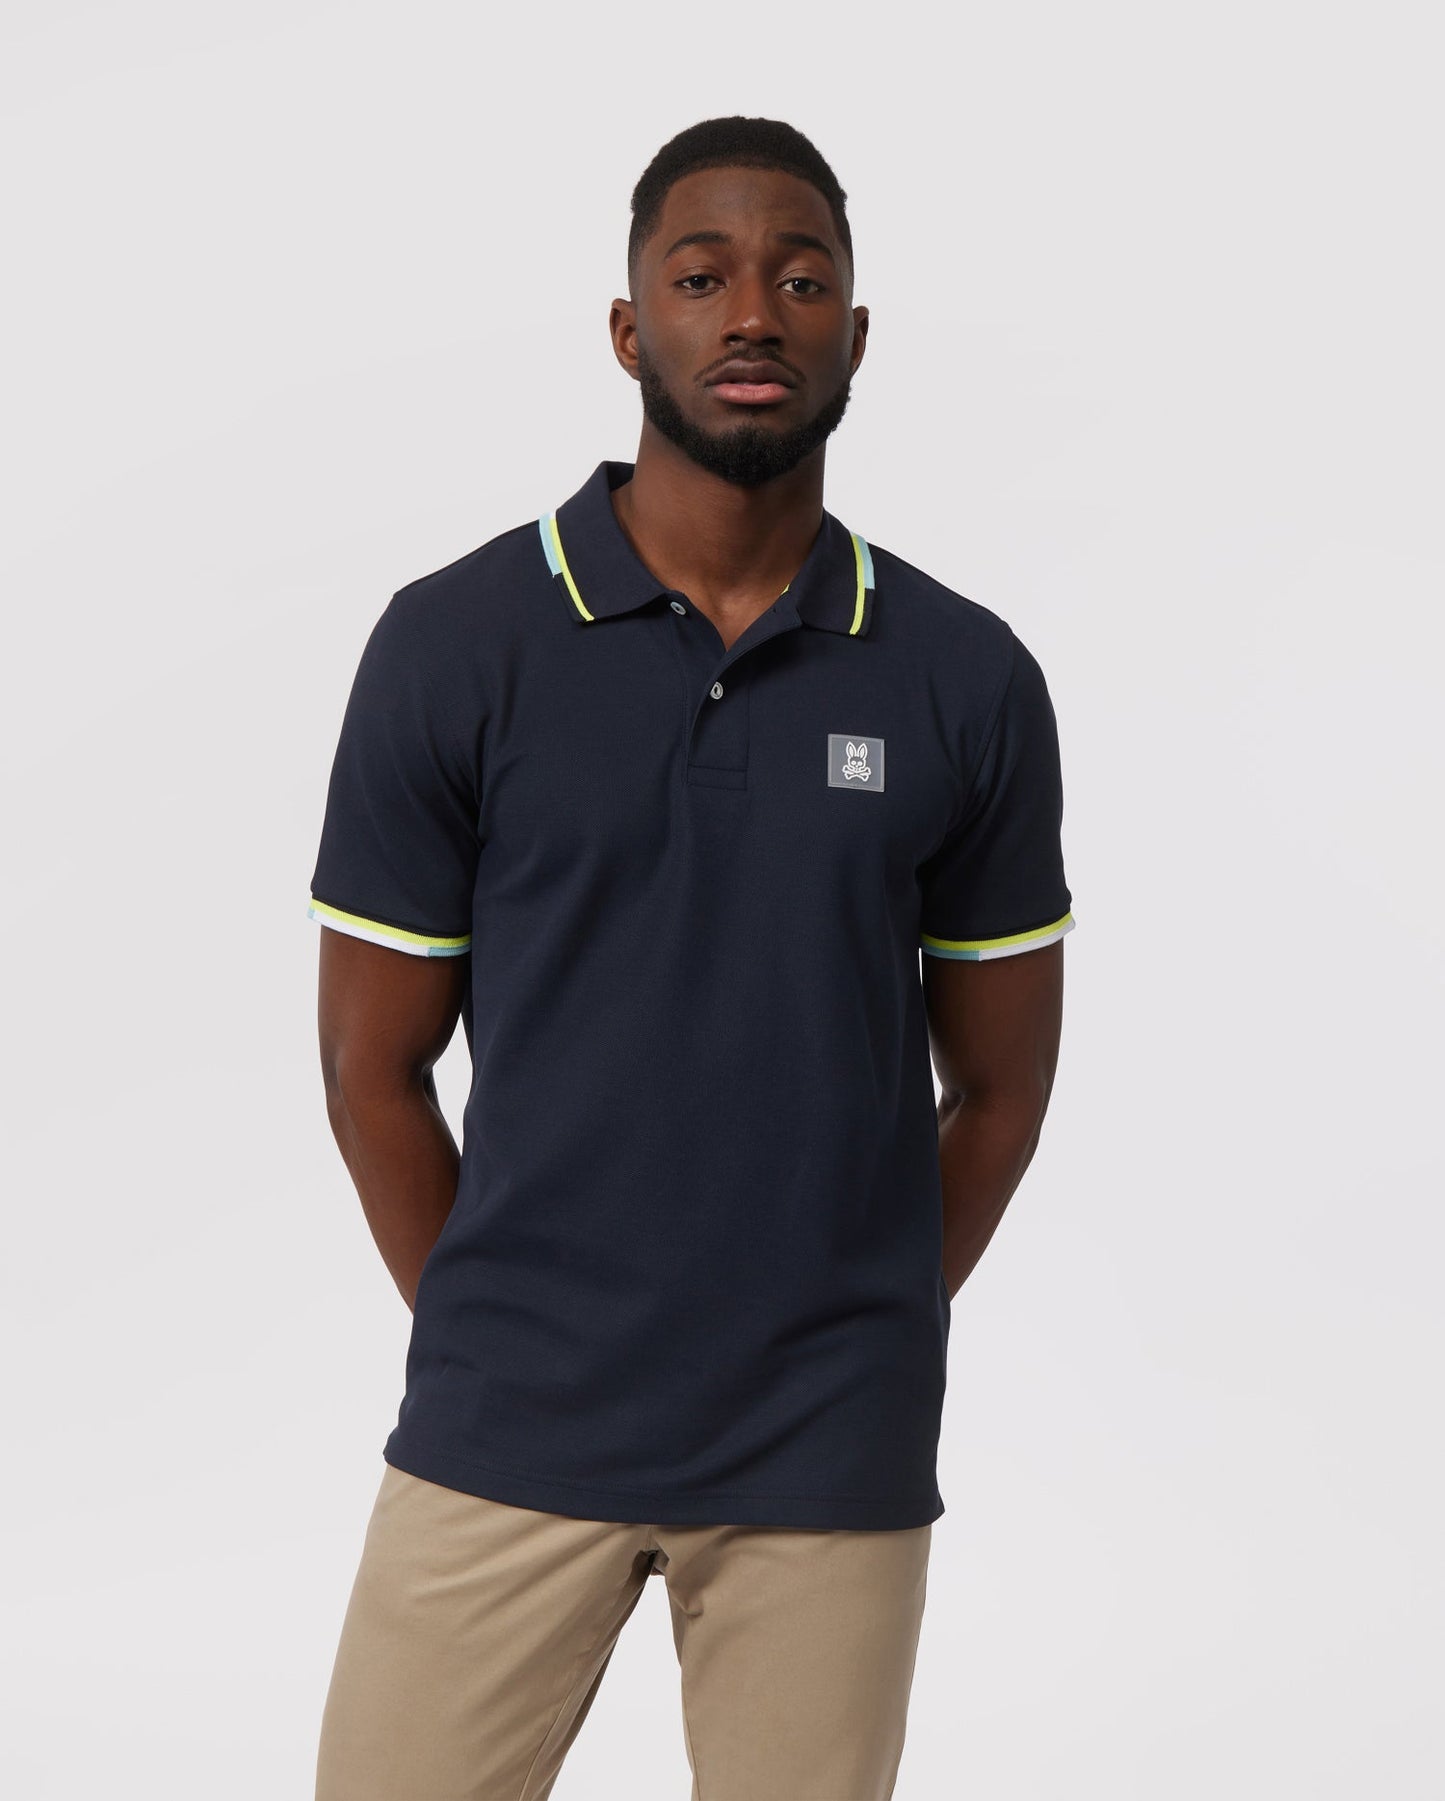 Buy FUAARK Men's Slim Fit Polo T-Shirt (Navy, Small) at